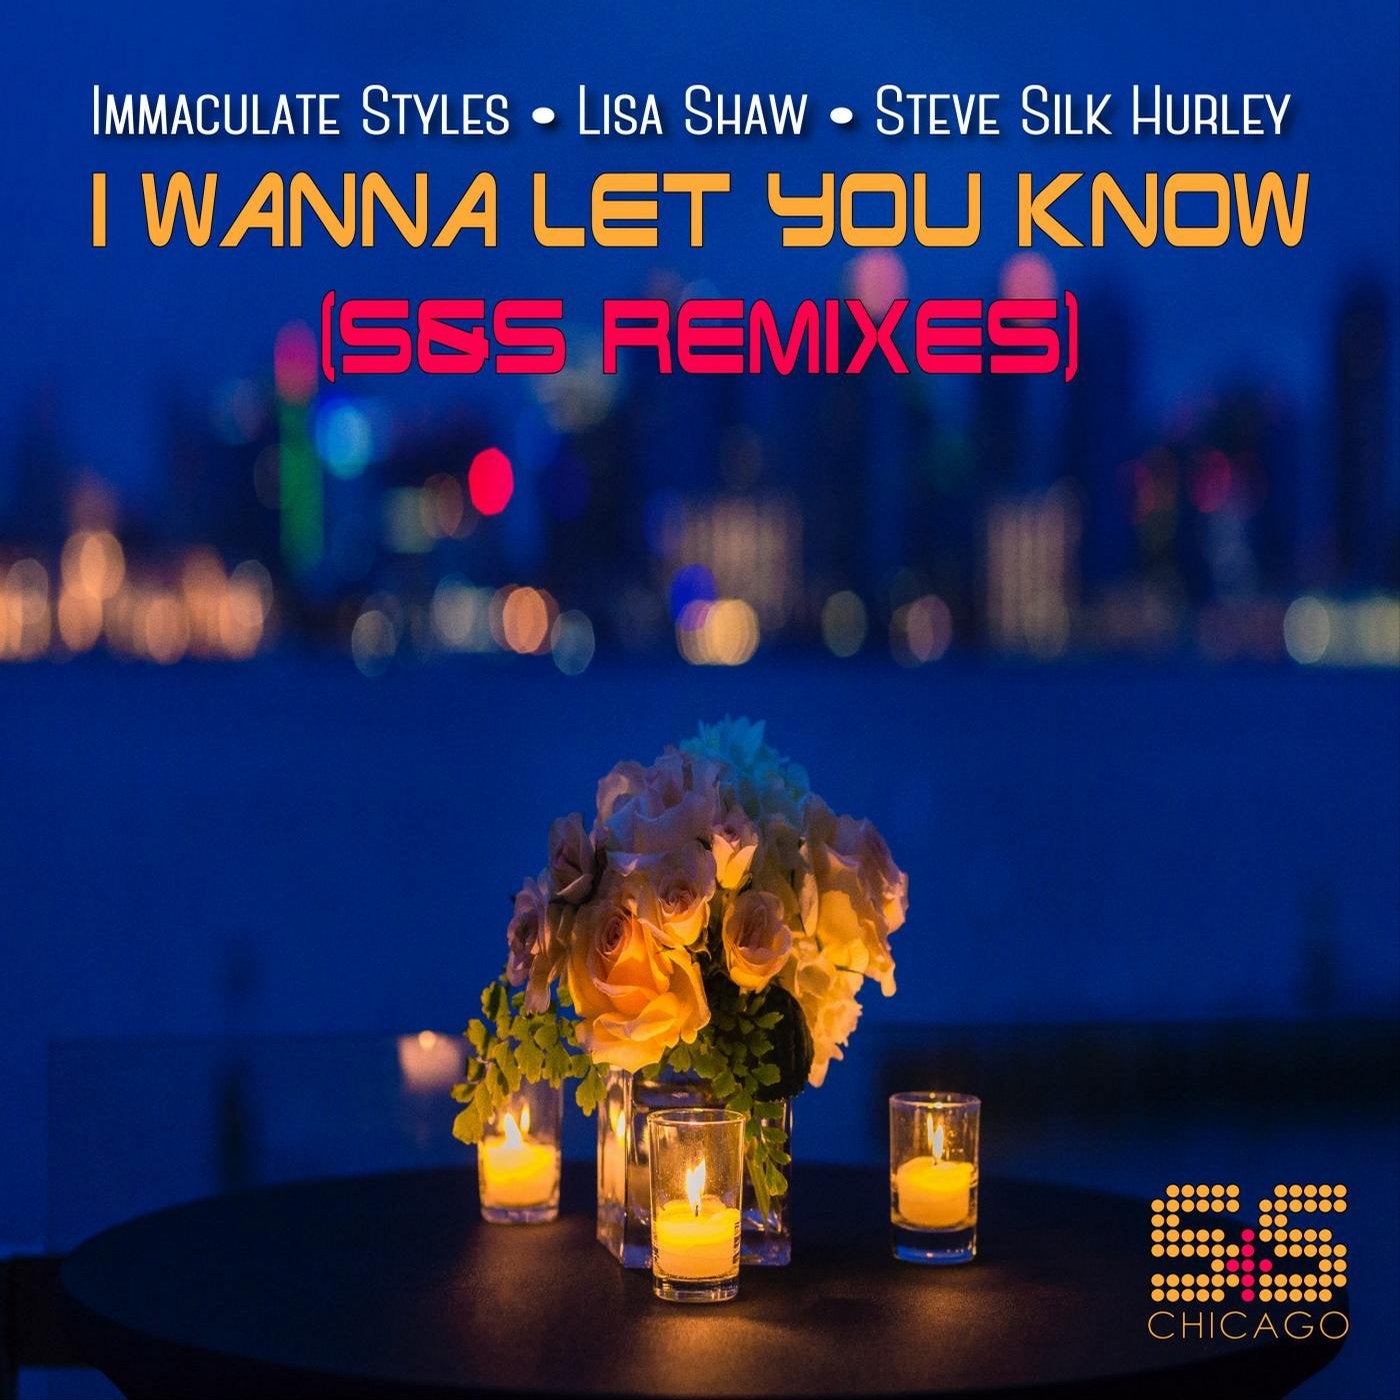 I Wanna Let You Know (S&S Remixes)